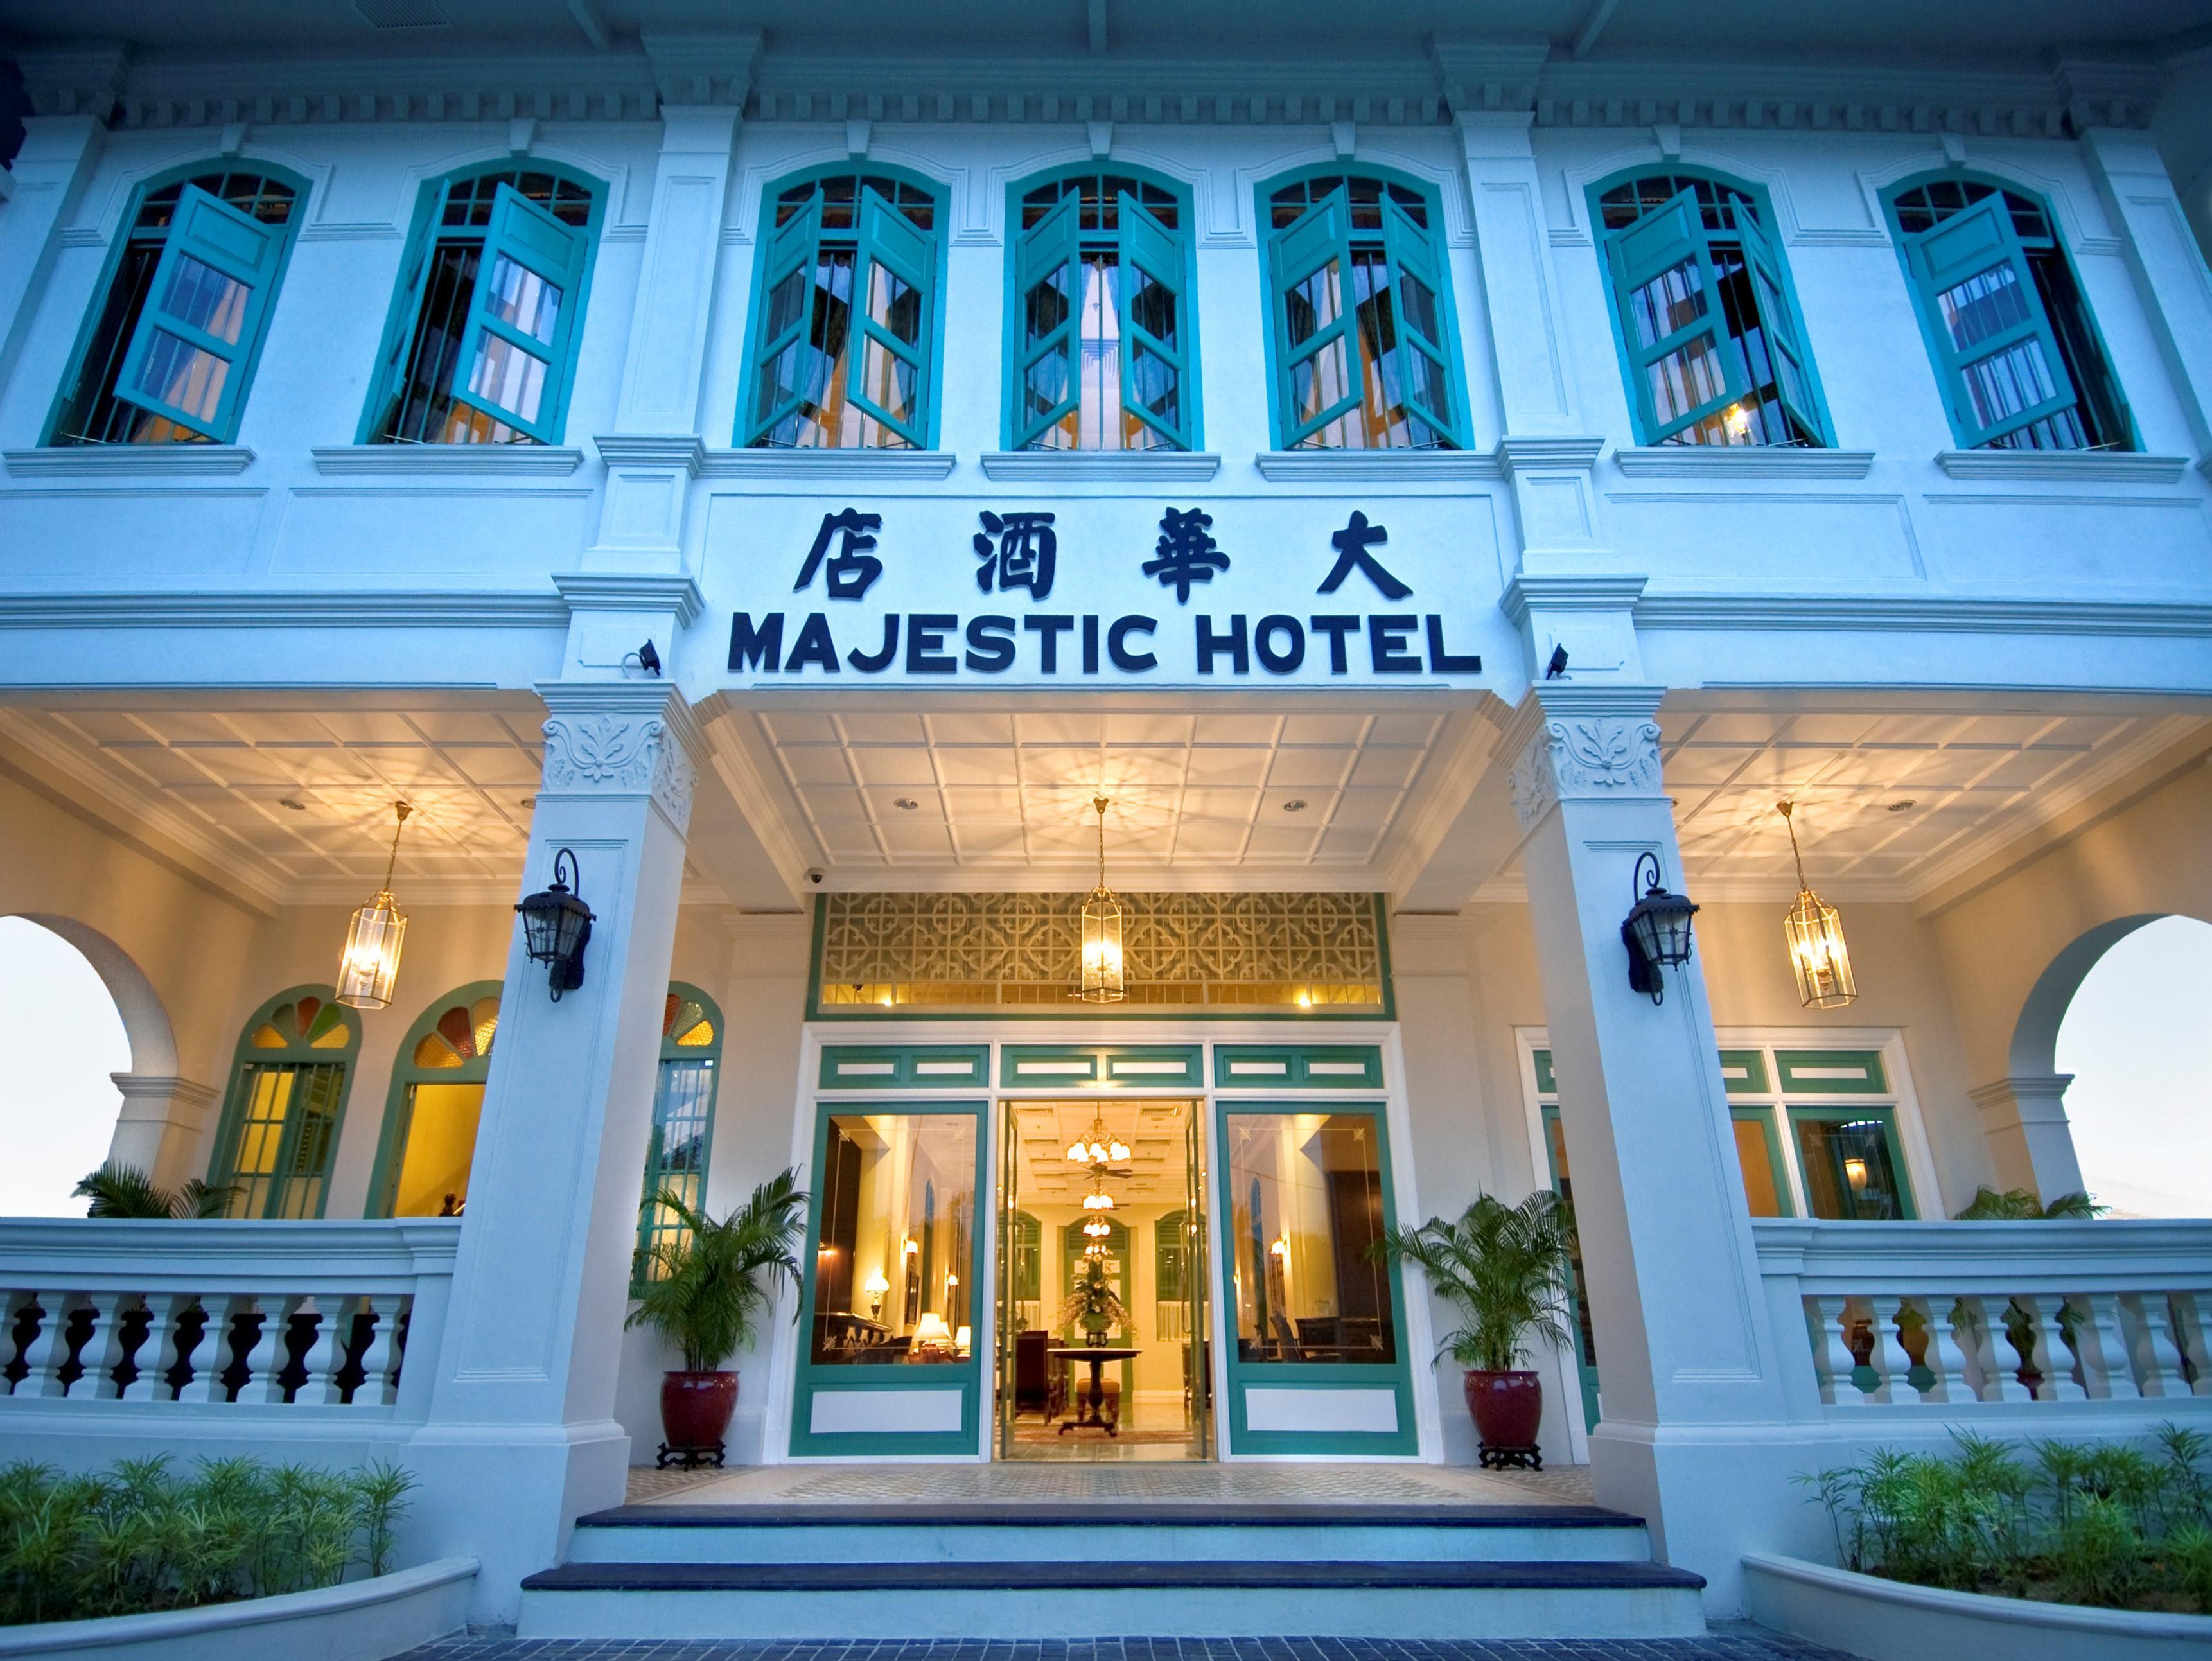 Majestic Malacca Hotel Malacca FAQ 2016, What facilities are there in Majestic Malacca Hotel Malacca 2016, What Languages Spoken are Supported in Majestic Malacca Hotel Malacca 2016, Which payment cards are accepted in Majestic Malacca Hotel Malacca , Malacca Majestic Malacca Hotel room facilities and services Q&A 2016, Malacca Majestic Malacca Hotel online booking services 2016, Malacca Majestic Malacca Hotel address 2016, Malacca Majestic Malacca Hotel telephone number 2016,Malacca Majestic Malacca Hotel map 2016, Malacca Majestic Malacca Hotel traffic guide 2016, how to go Malacca Majestic Malacca Hotel, Malacca Majestic Malacca Hotel booking online 2016, Malacca Majestic Malacca Hotel room types 2016.